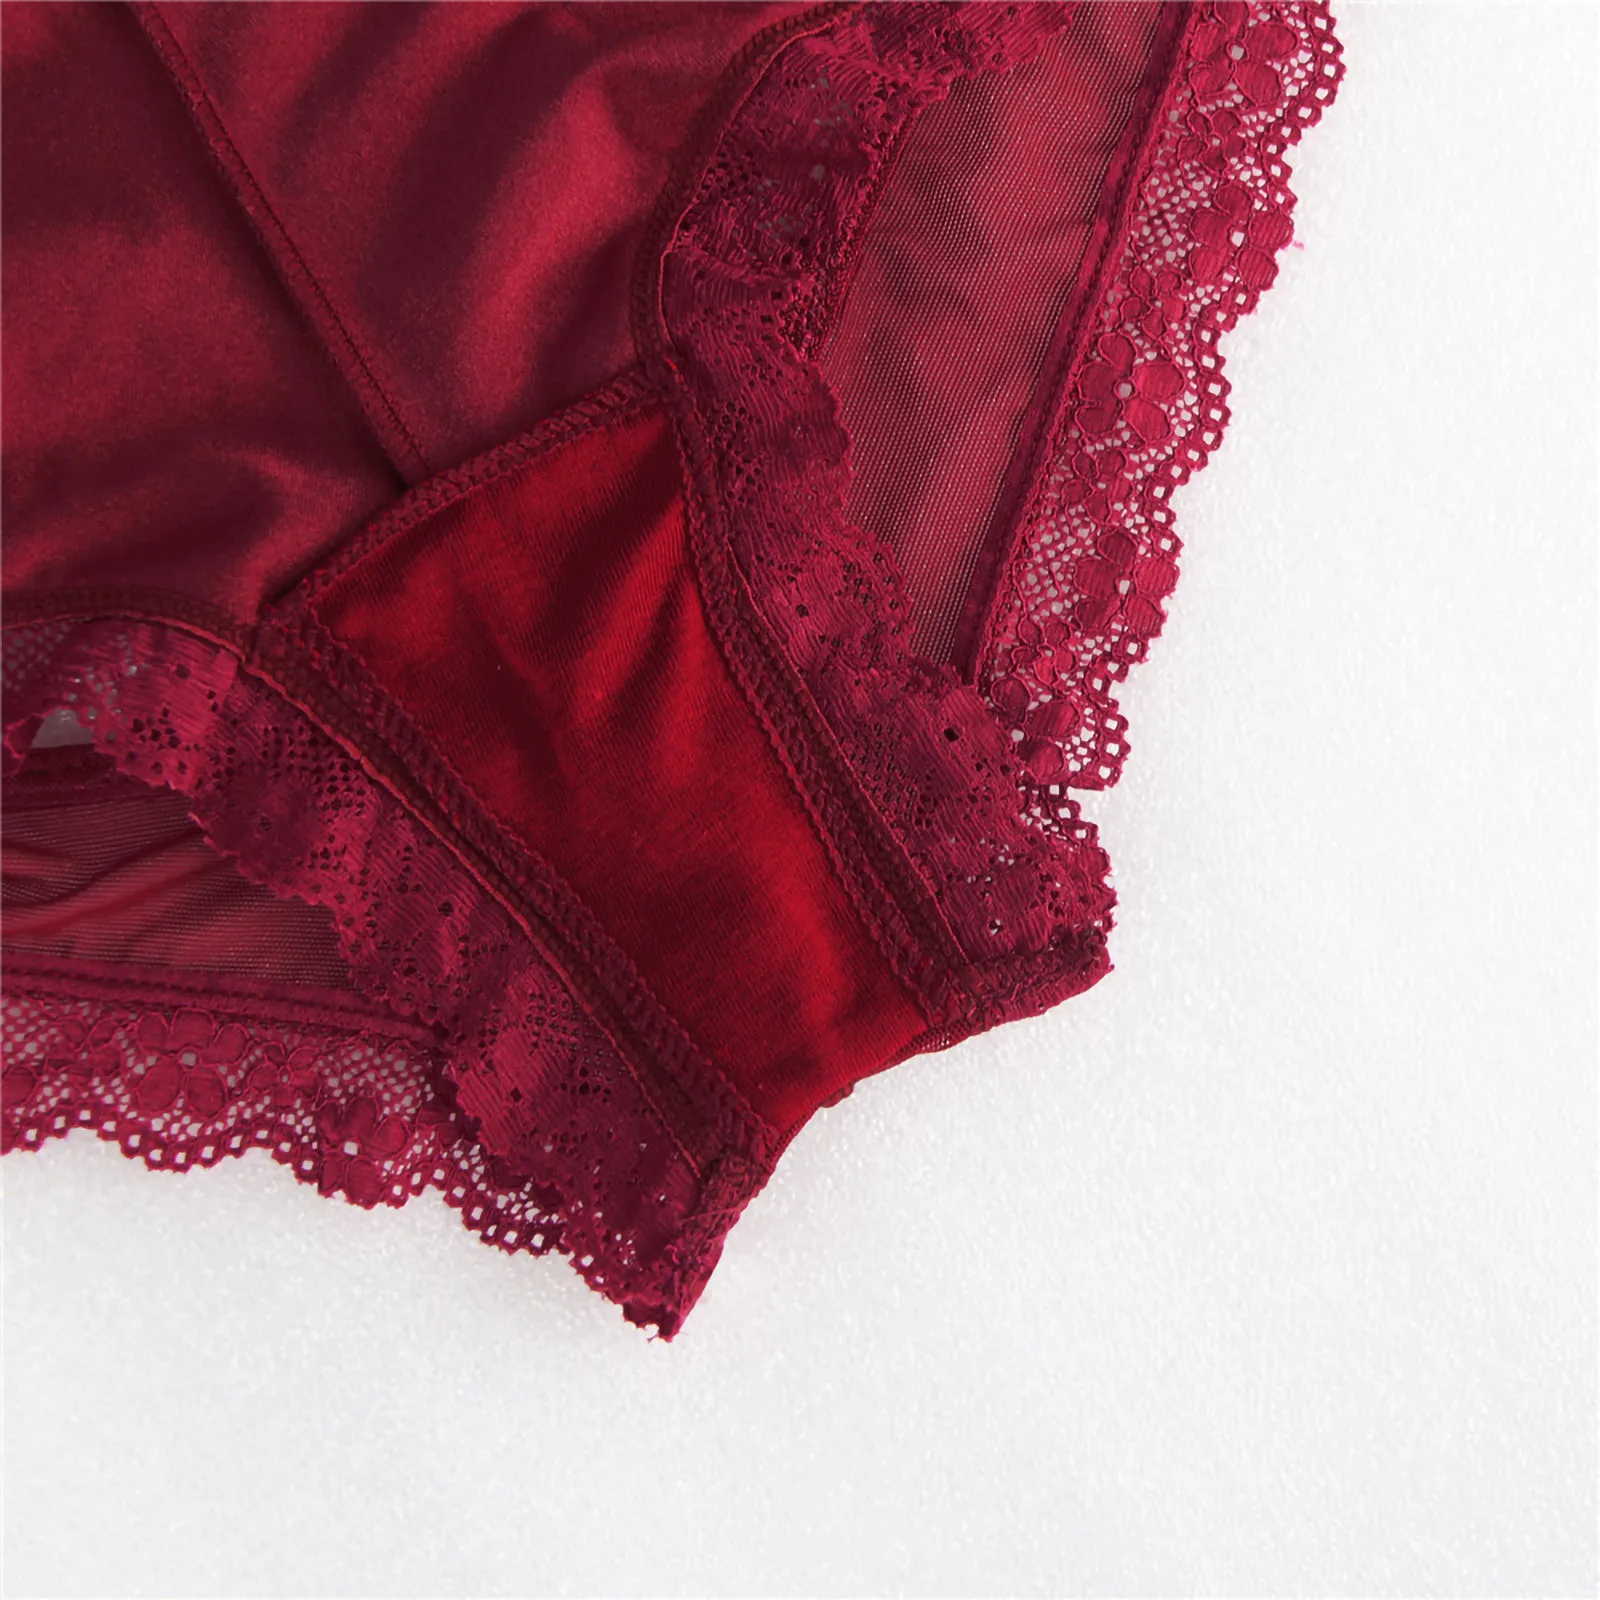 

Women's Underwear Plus Size Sexy Lingerie Lace Crotchless G string Sexy Panties Porno Thongs Babydoll Underpants Erotic Costumes